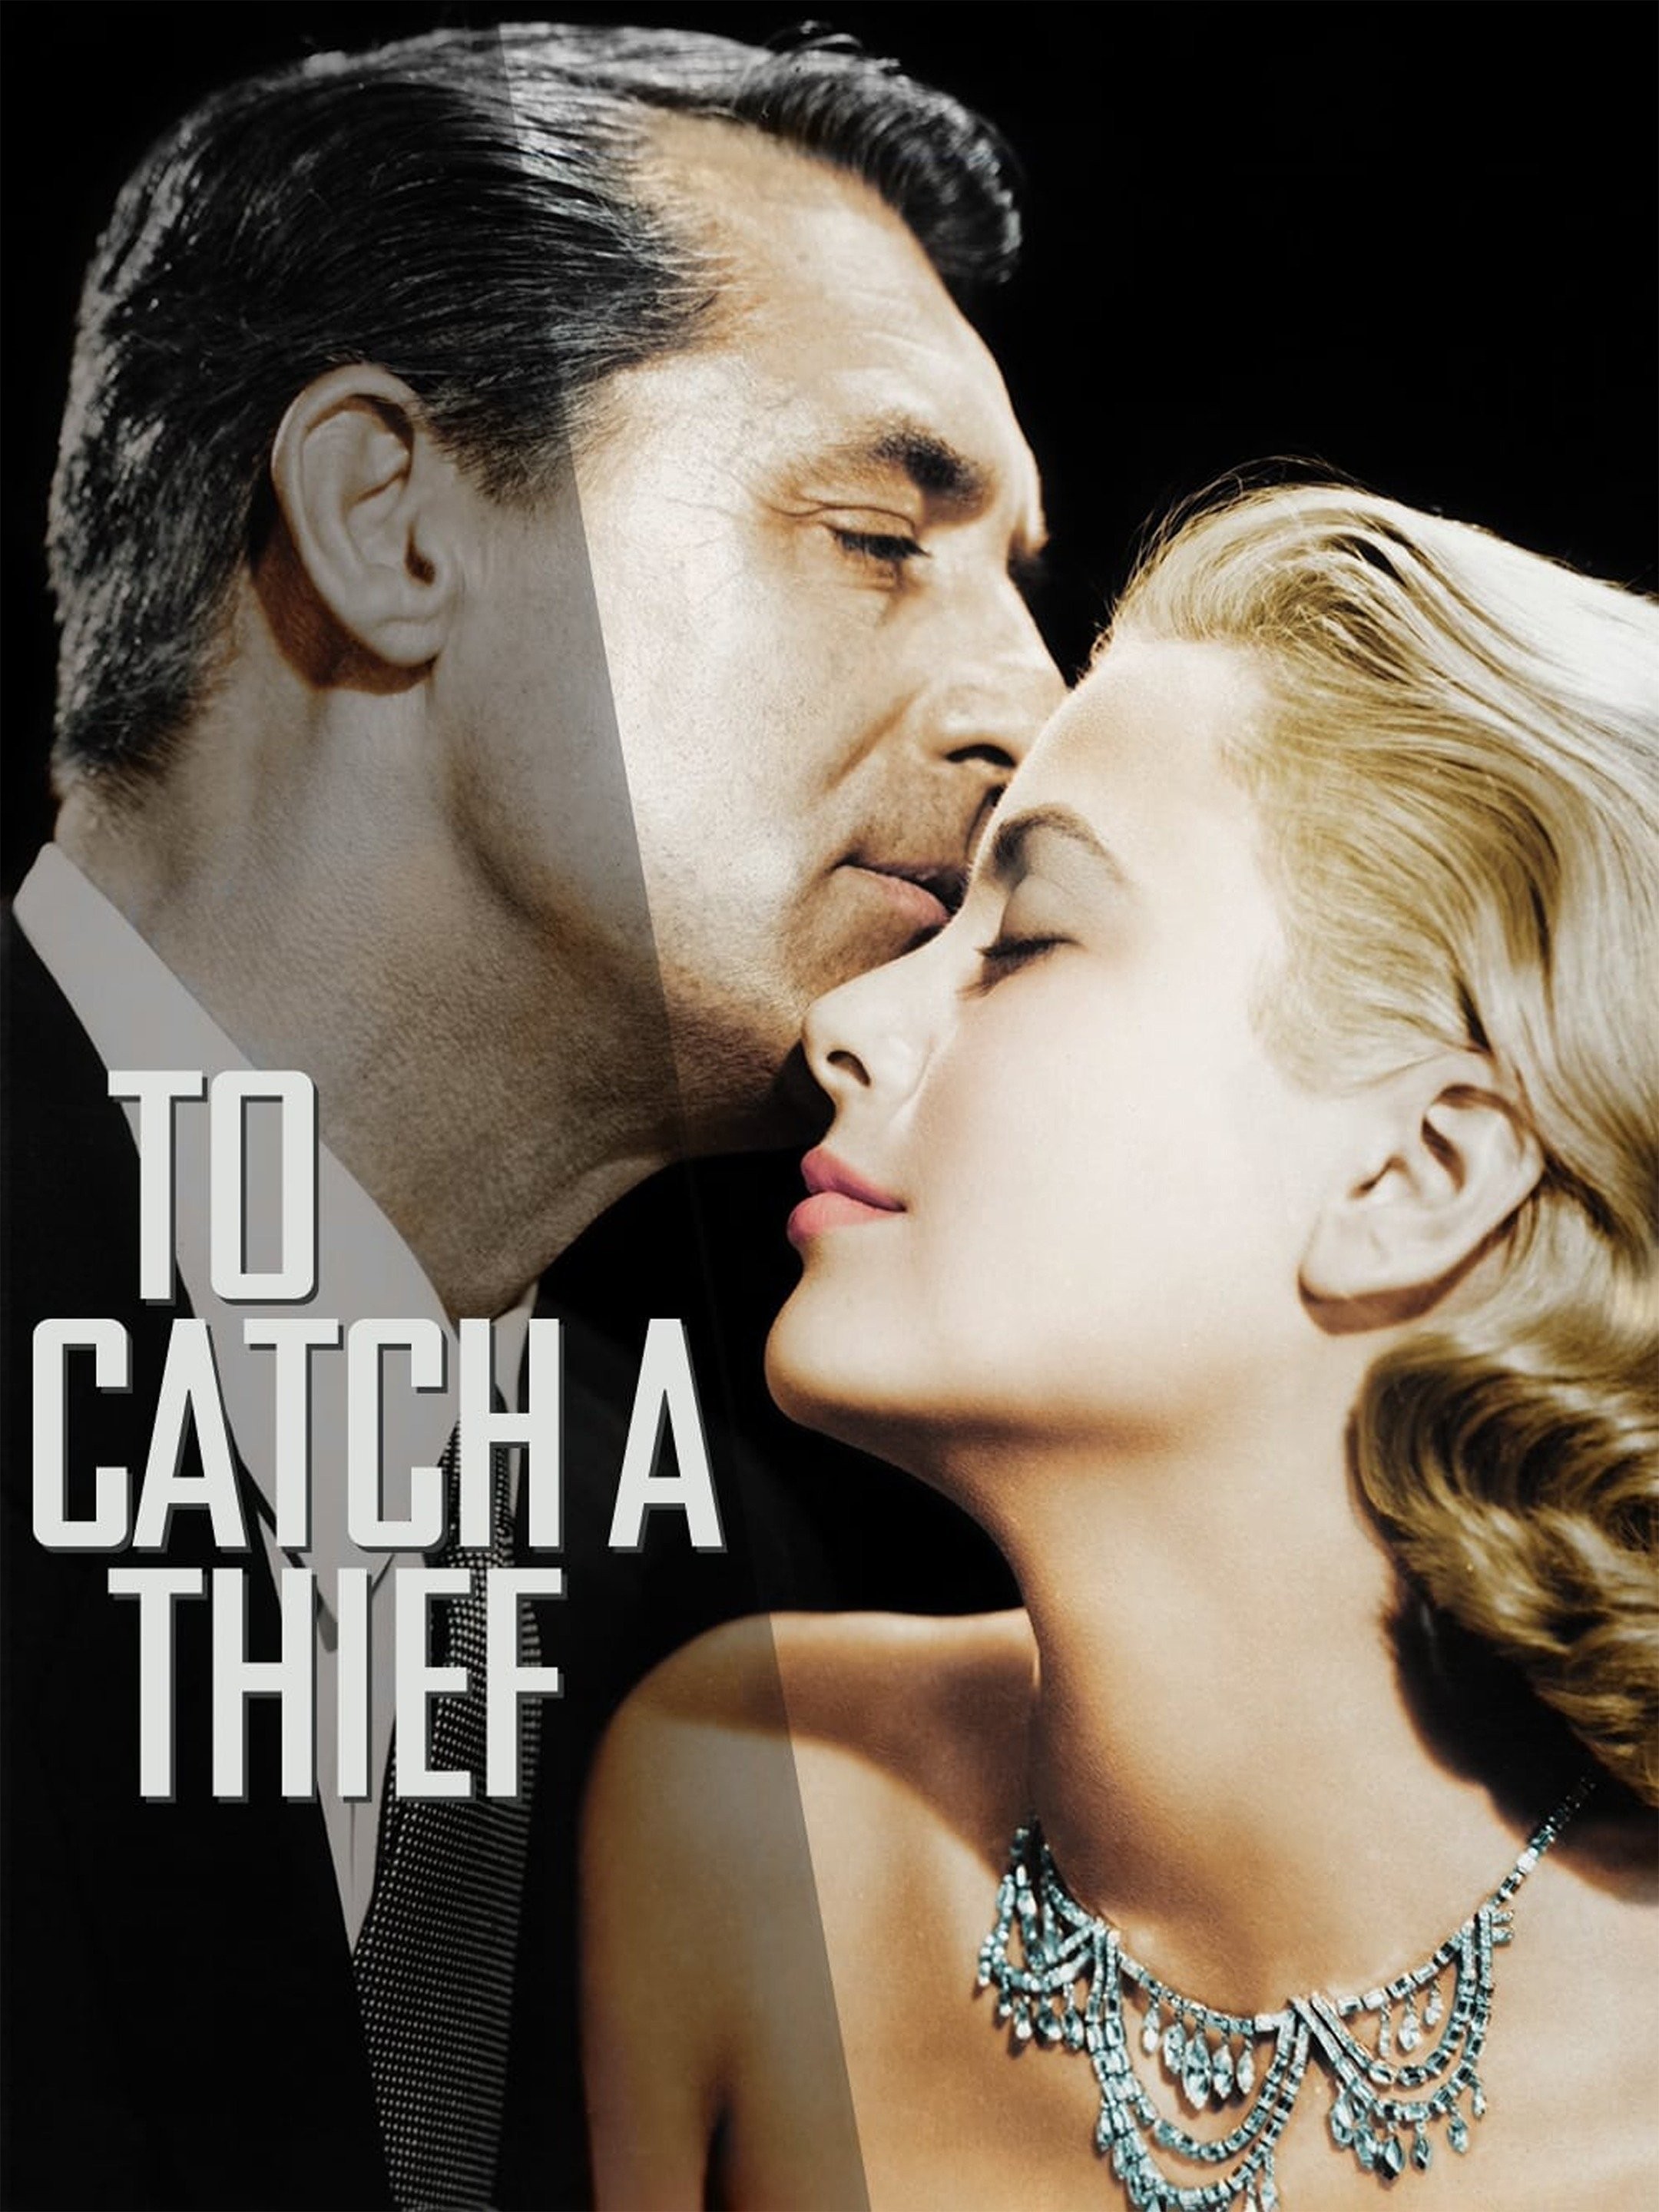 My Review of 'To Catch a Thief' (1955)